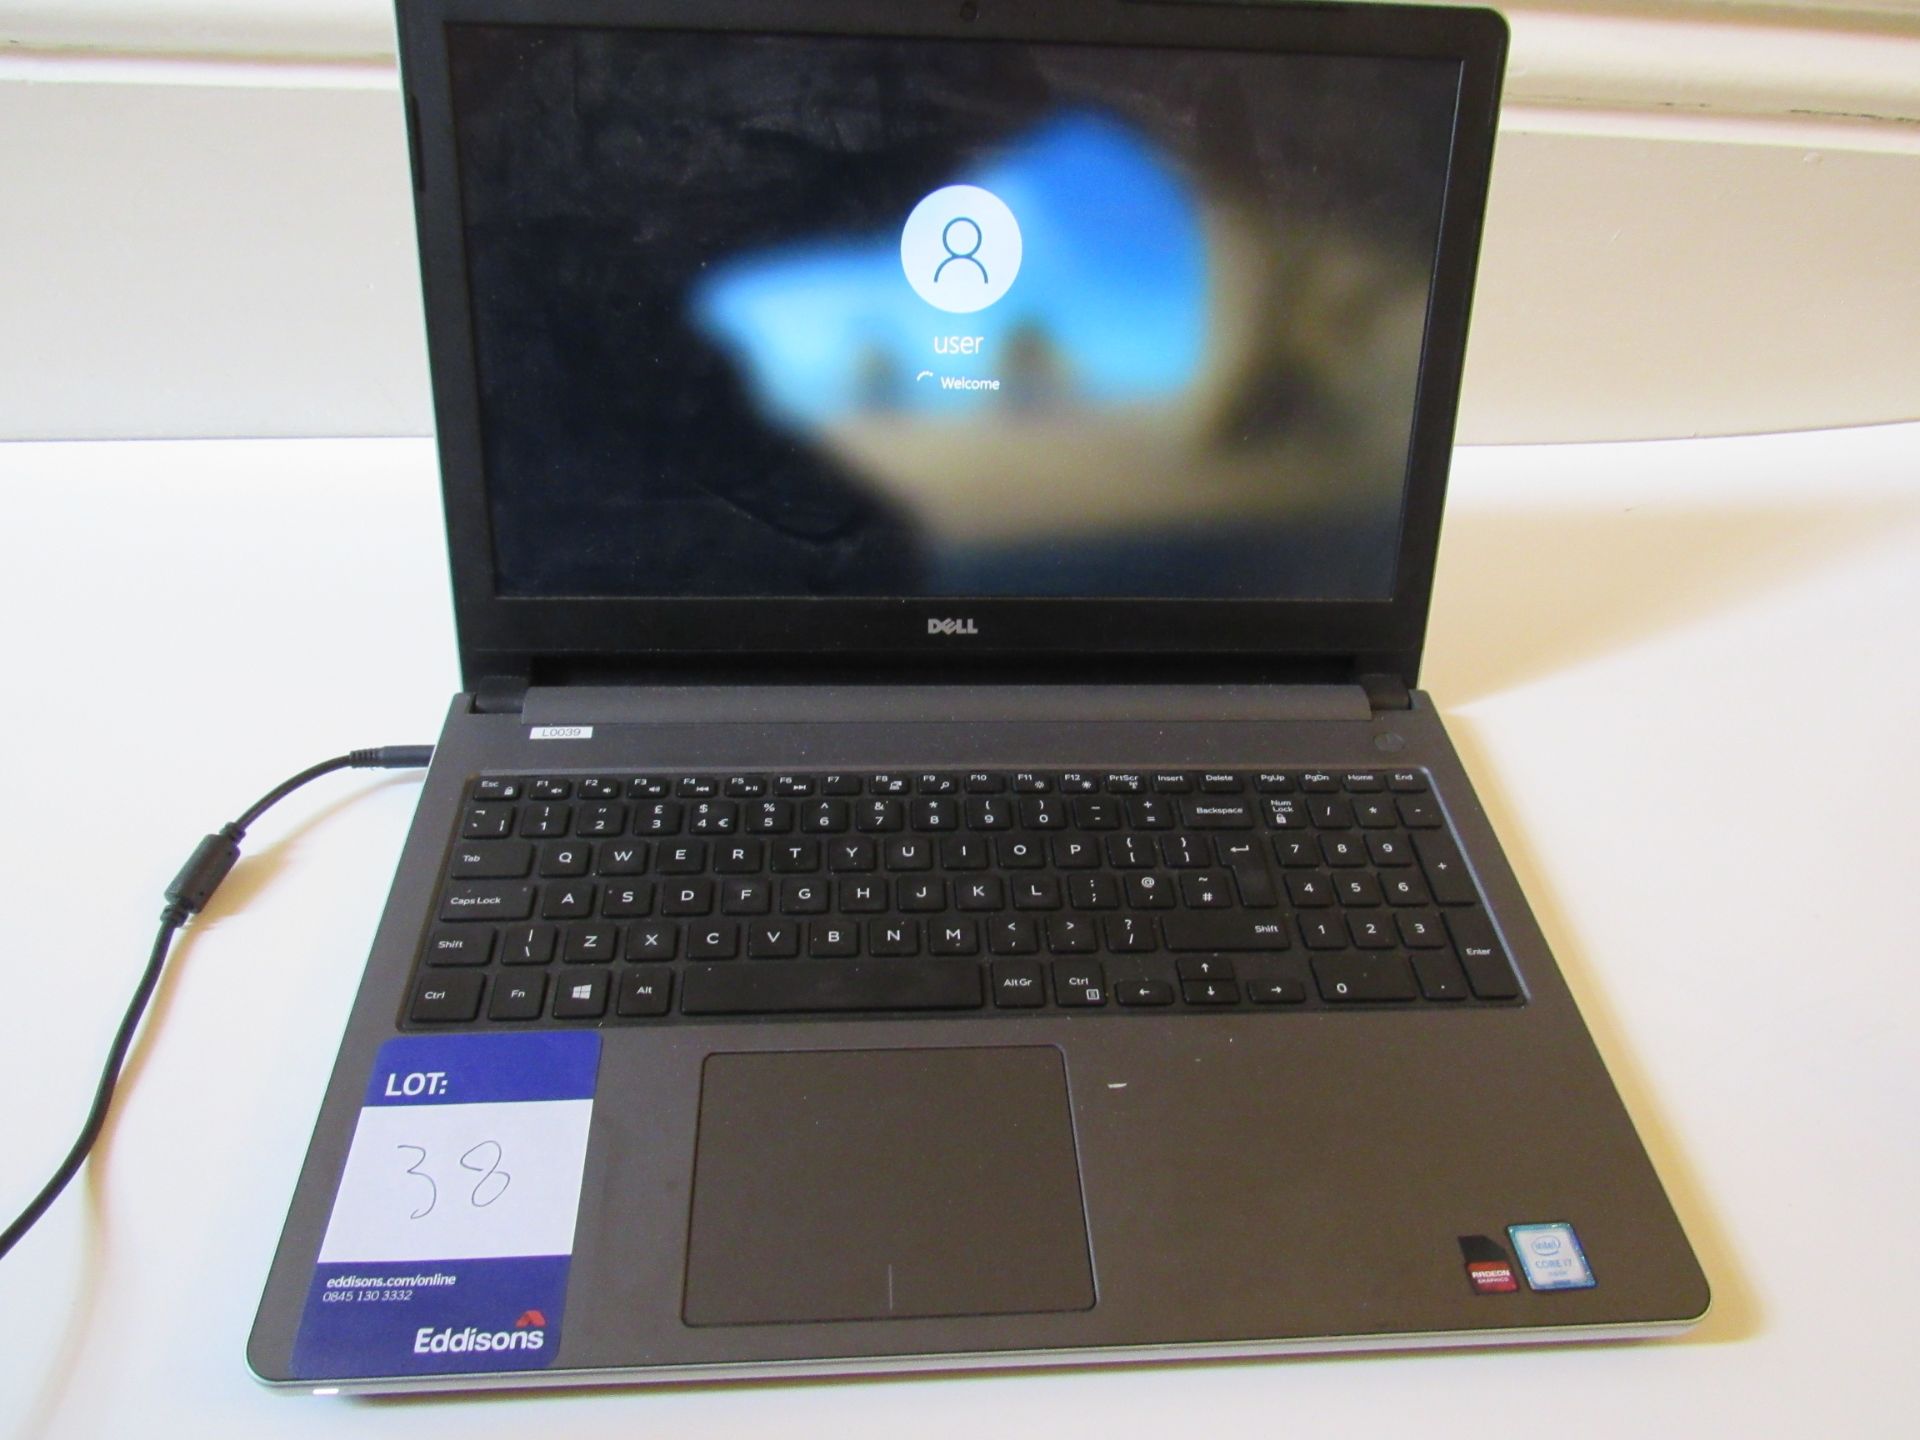 Dell Inspiron 5559, Intel i7-6500U, 16GB RAM, 2TB HDD, No Charger (Located in Leeds)